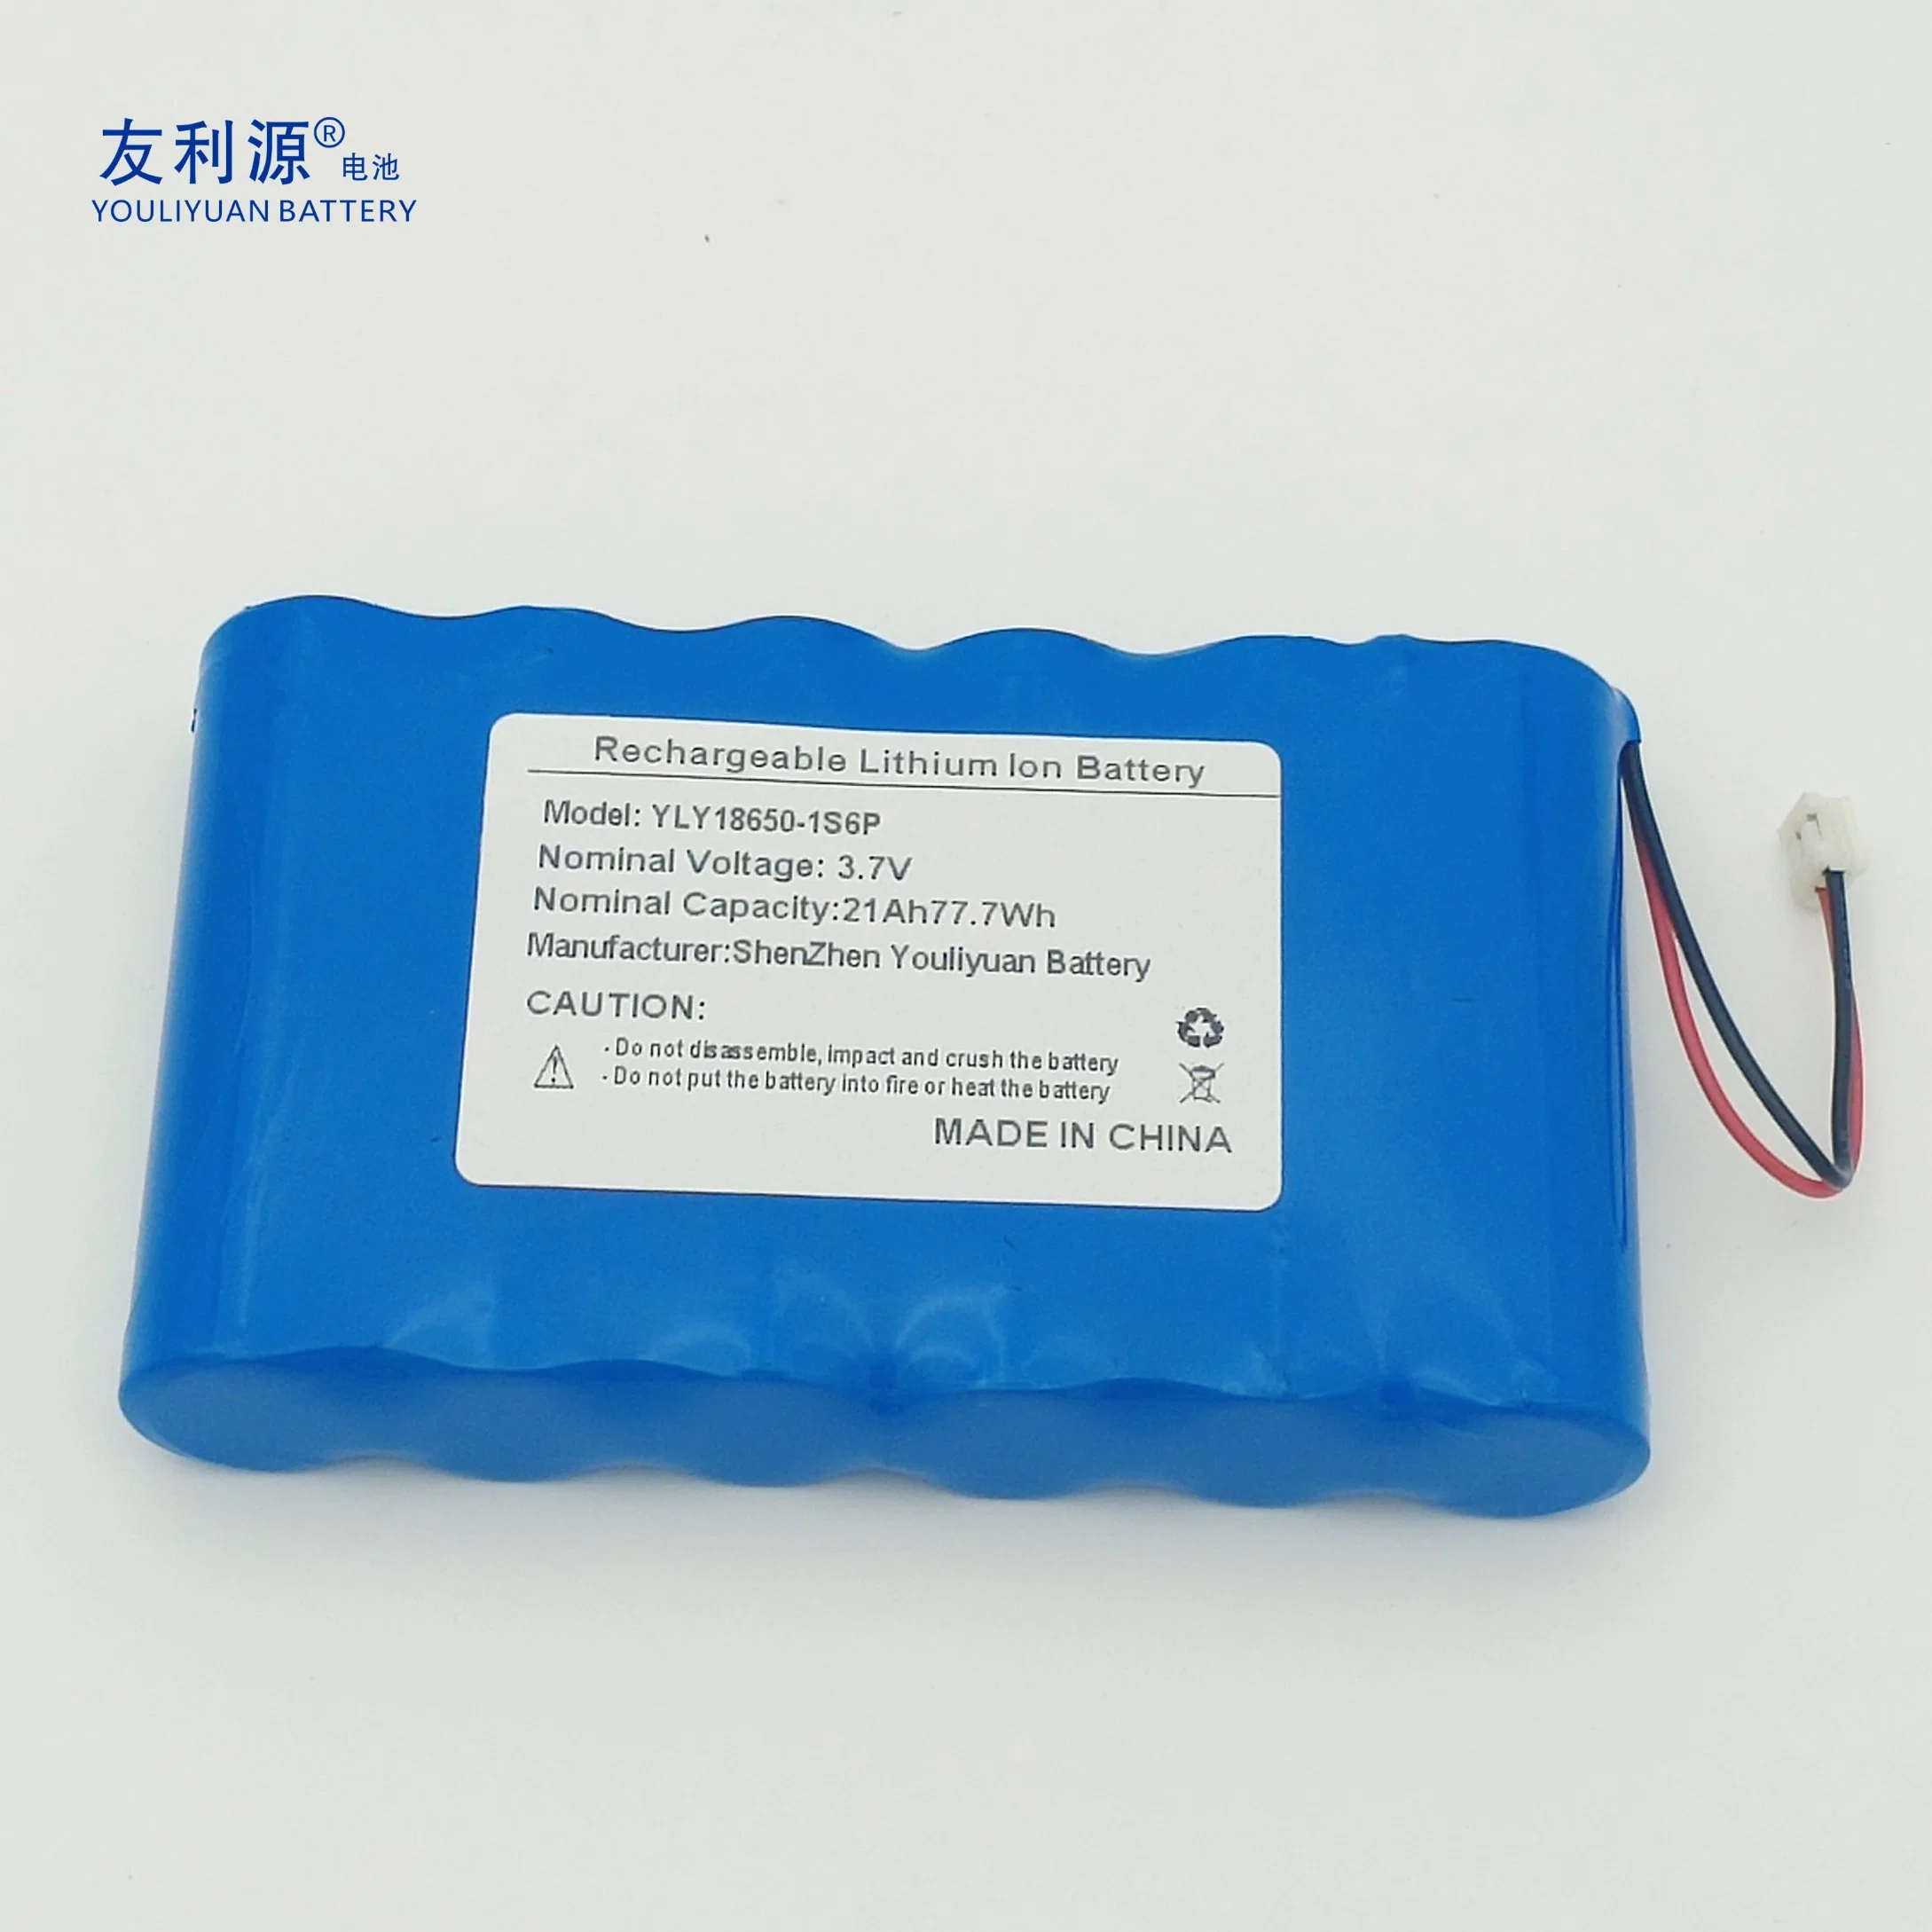 OEM ODM Laptop Rechargeable 3500mAh Li Ion Cell Solar Energy Storage Forklift Electric Vehicle UPS Power Bank Electric Scooter E-Bike Lithium Ion 18650 Battery